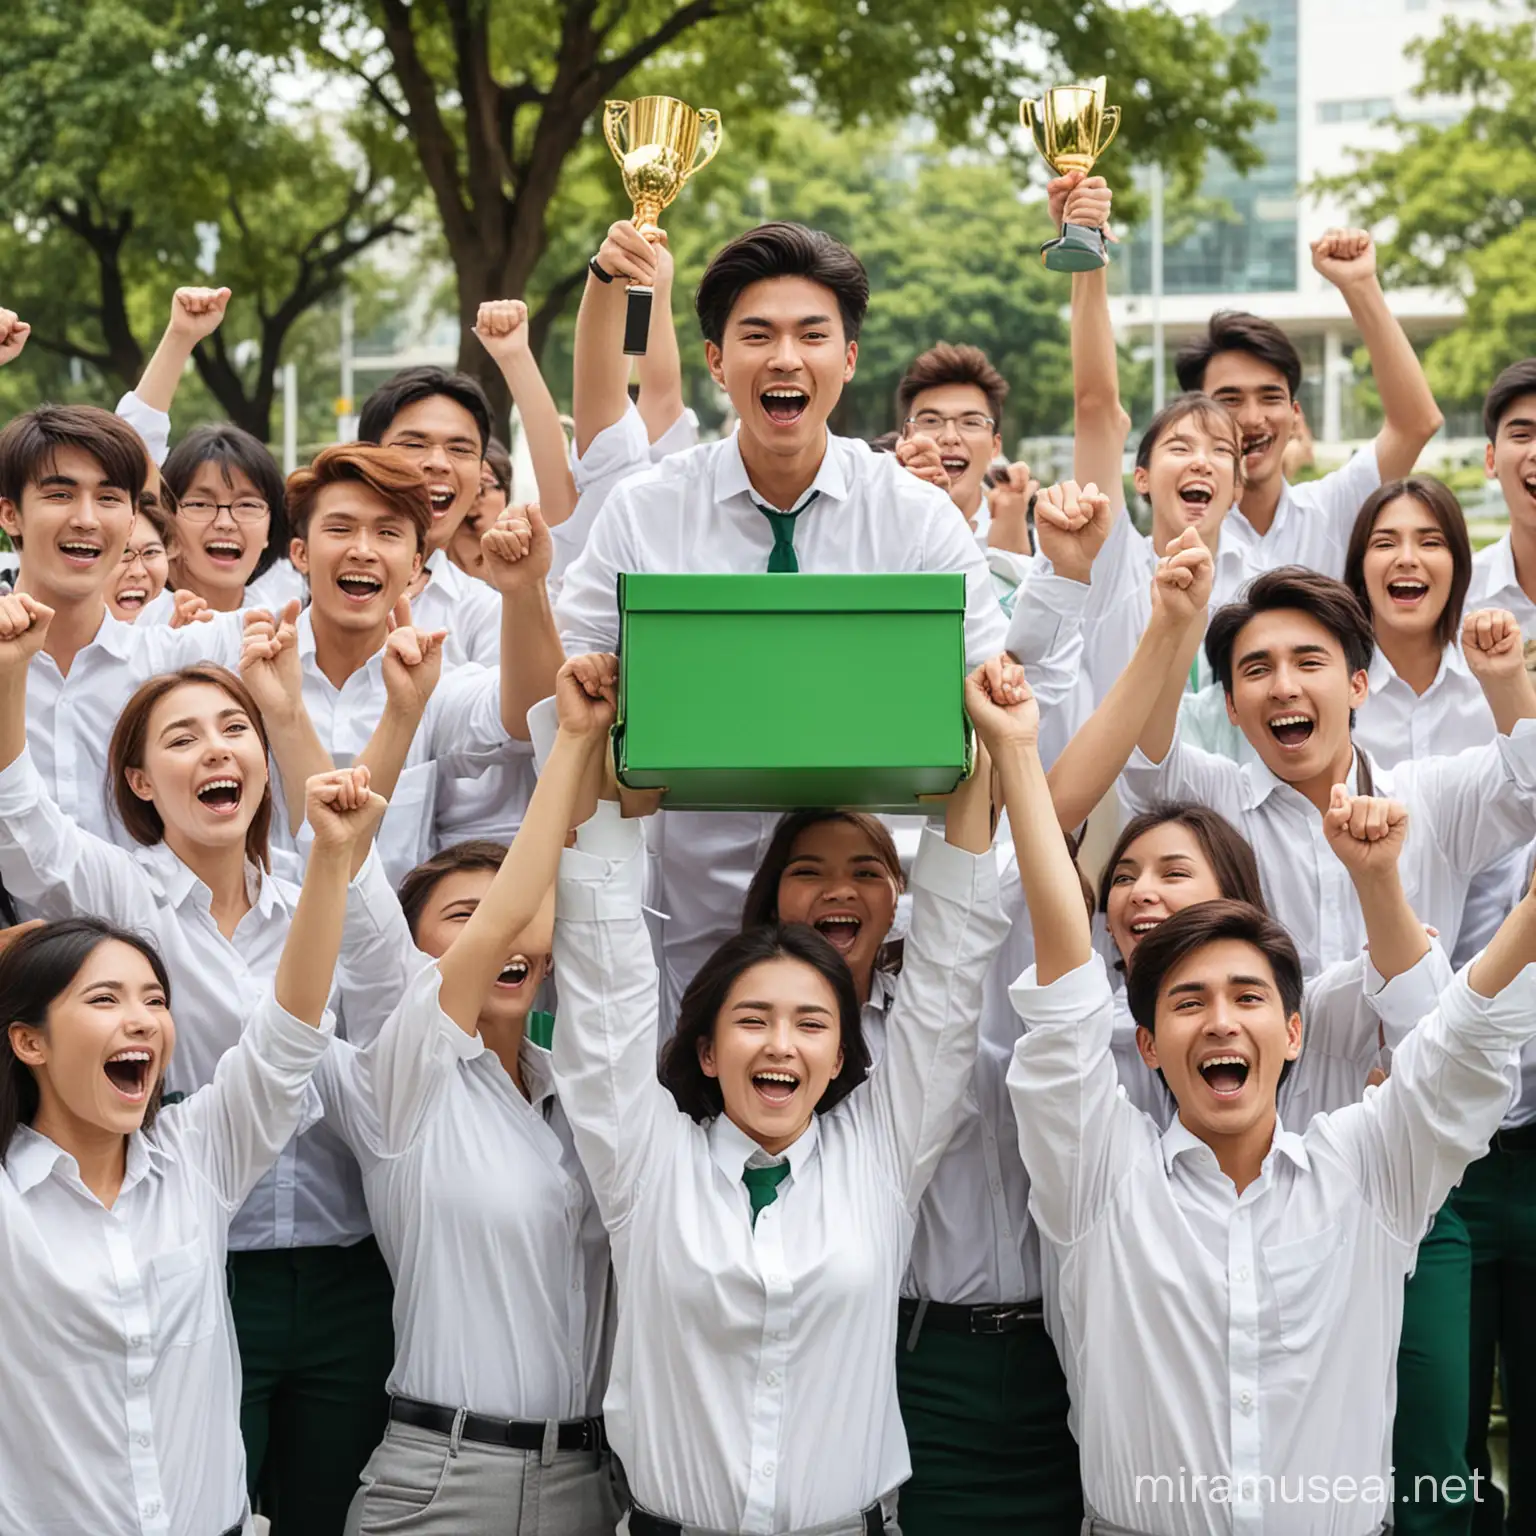 University Students Celebrate Victory with Green Box Trophy